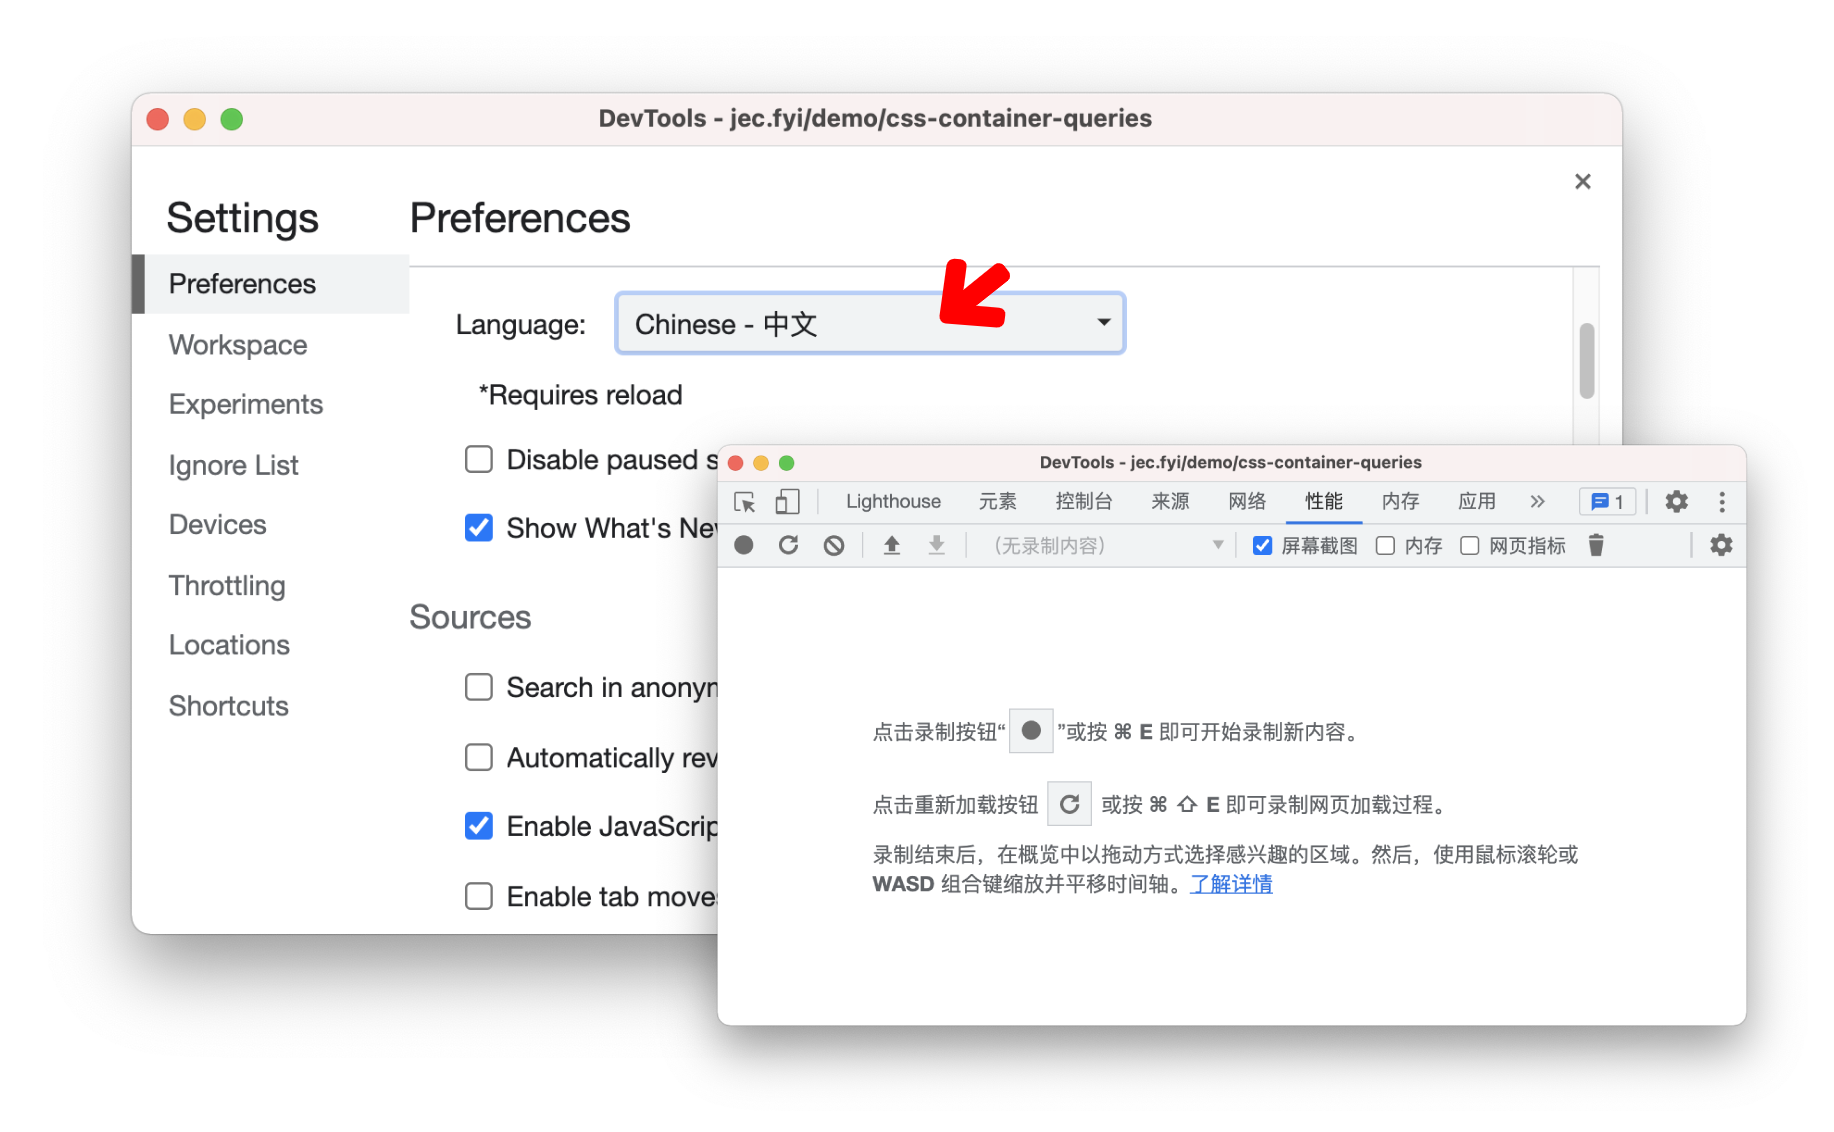 Change language in Settings > Preferences